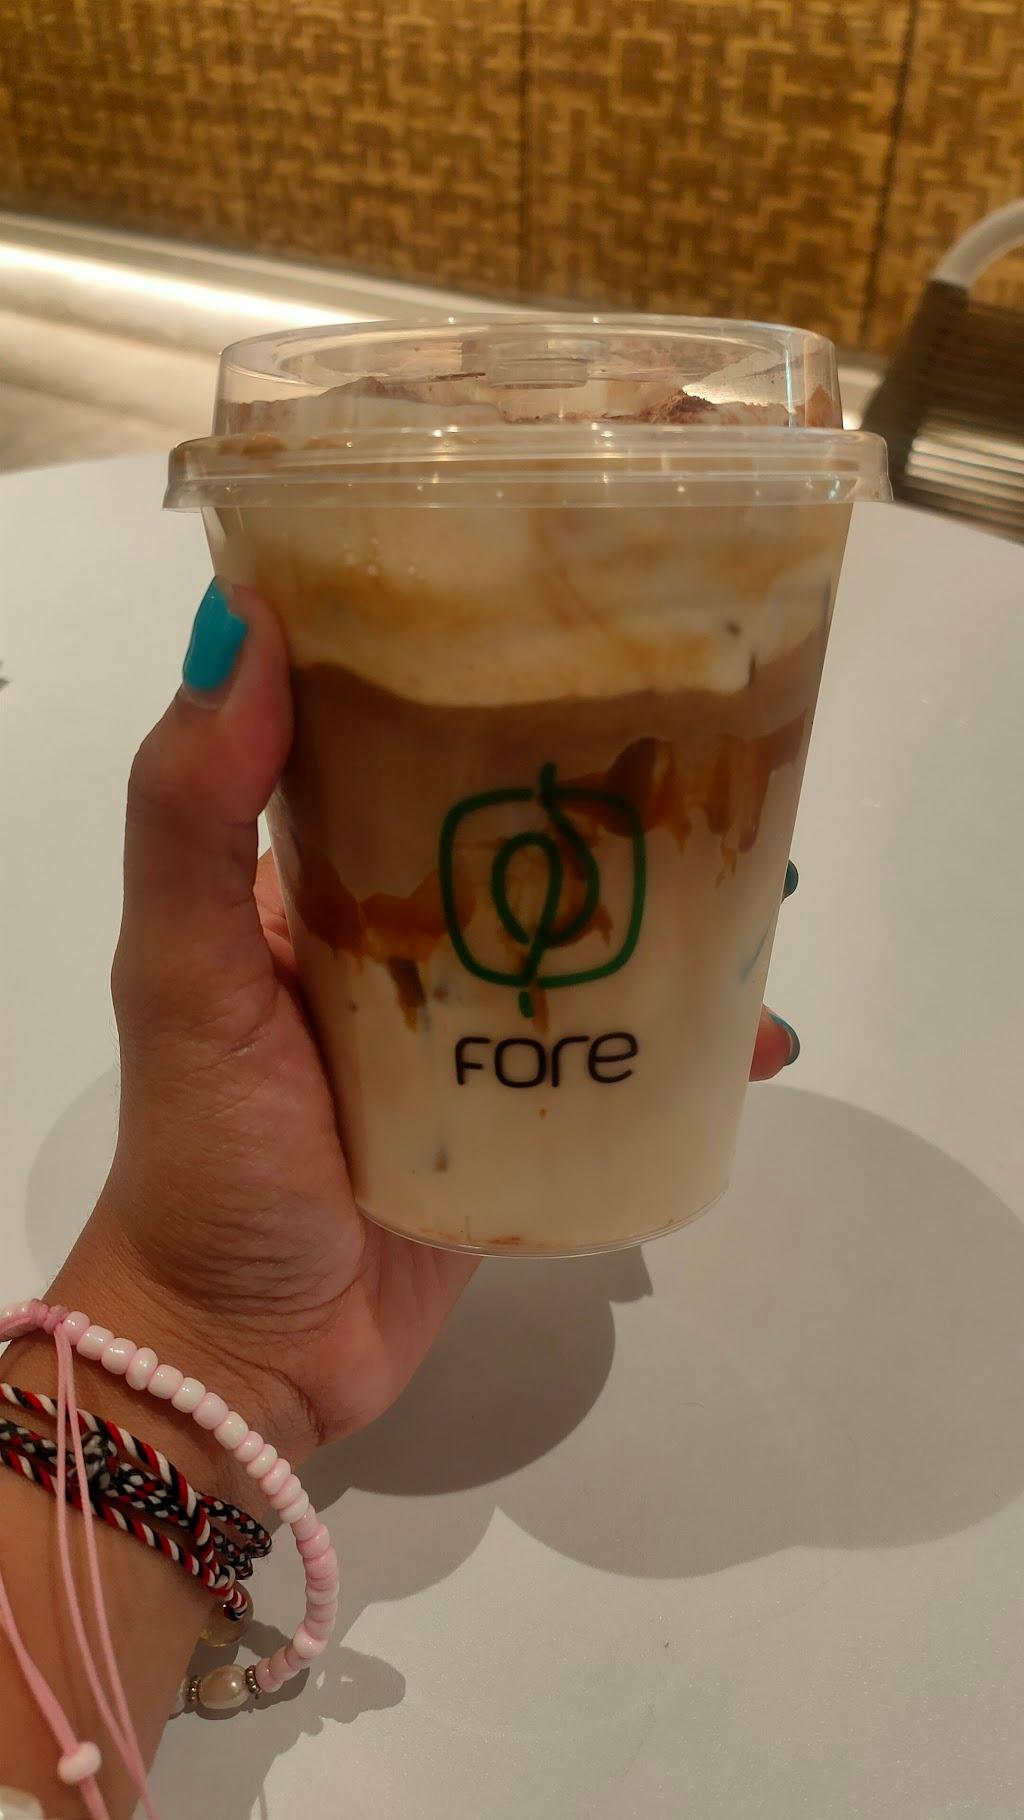 Fore Coffee - Terminal 1A Soekarno-Hatta Airport review